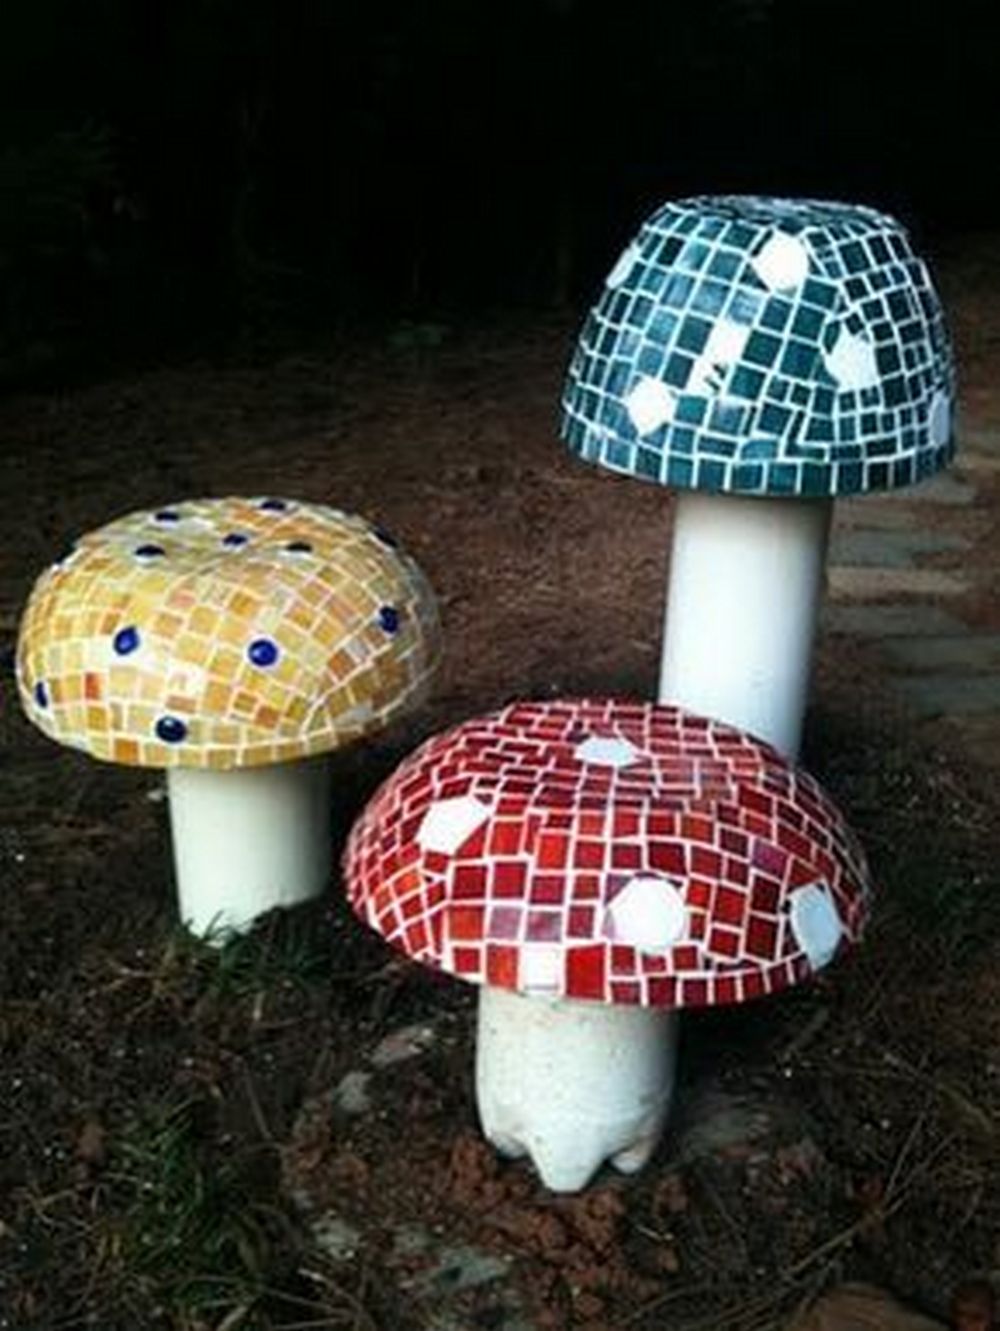 How to Make Concrete Mushrooms - Craft projects for every fan!